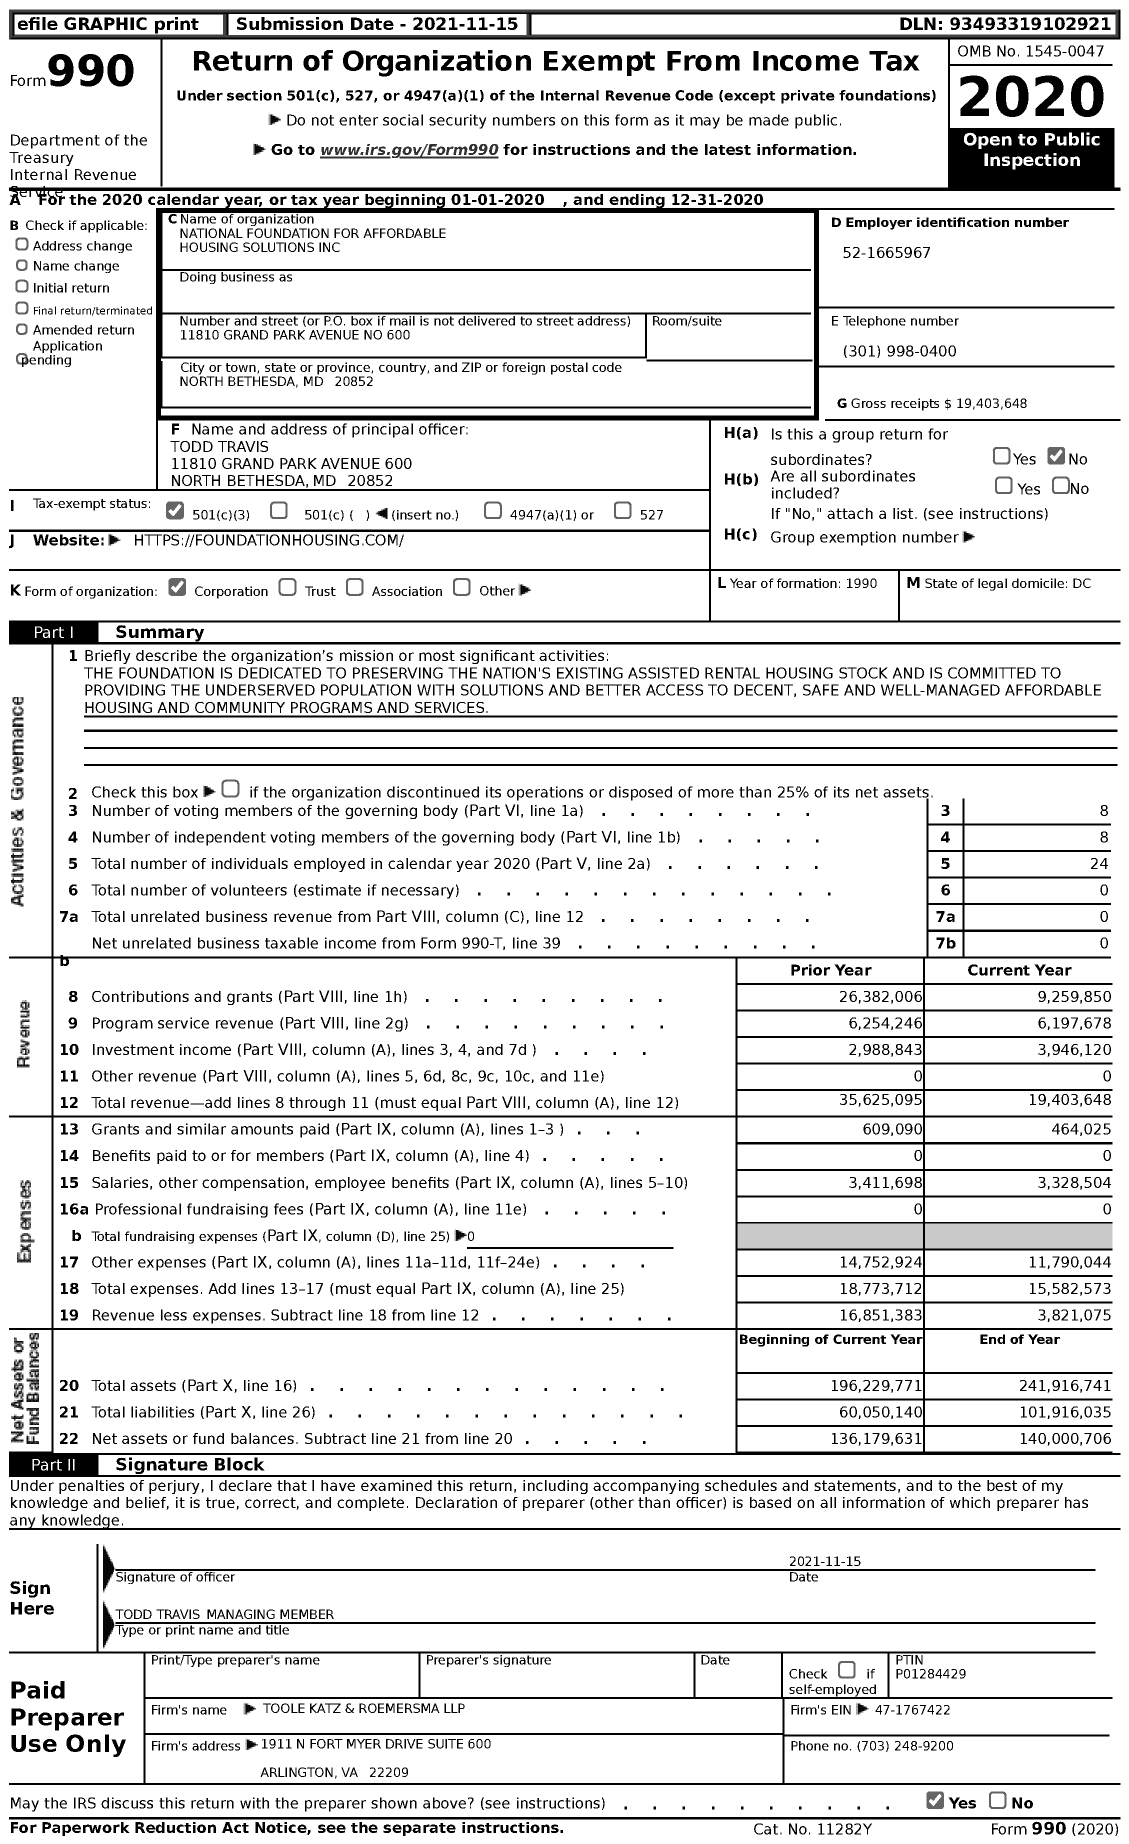 Image of first page of 2020 Form 990 for National Foundation for Affordable Housing Solutions (NFAHS)